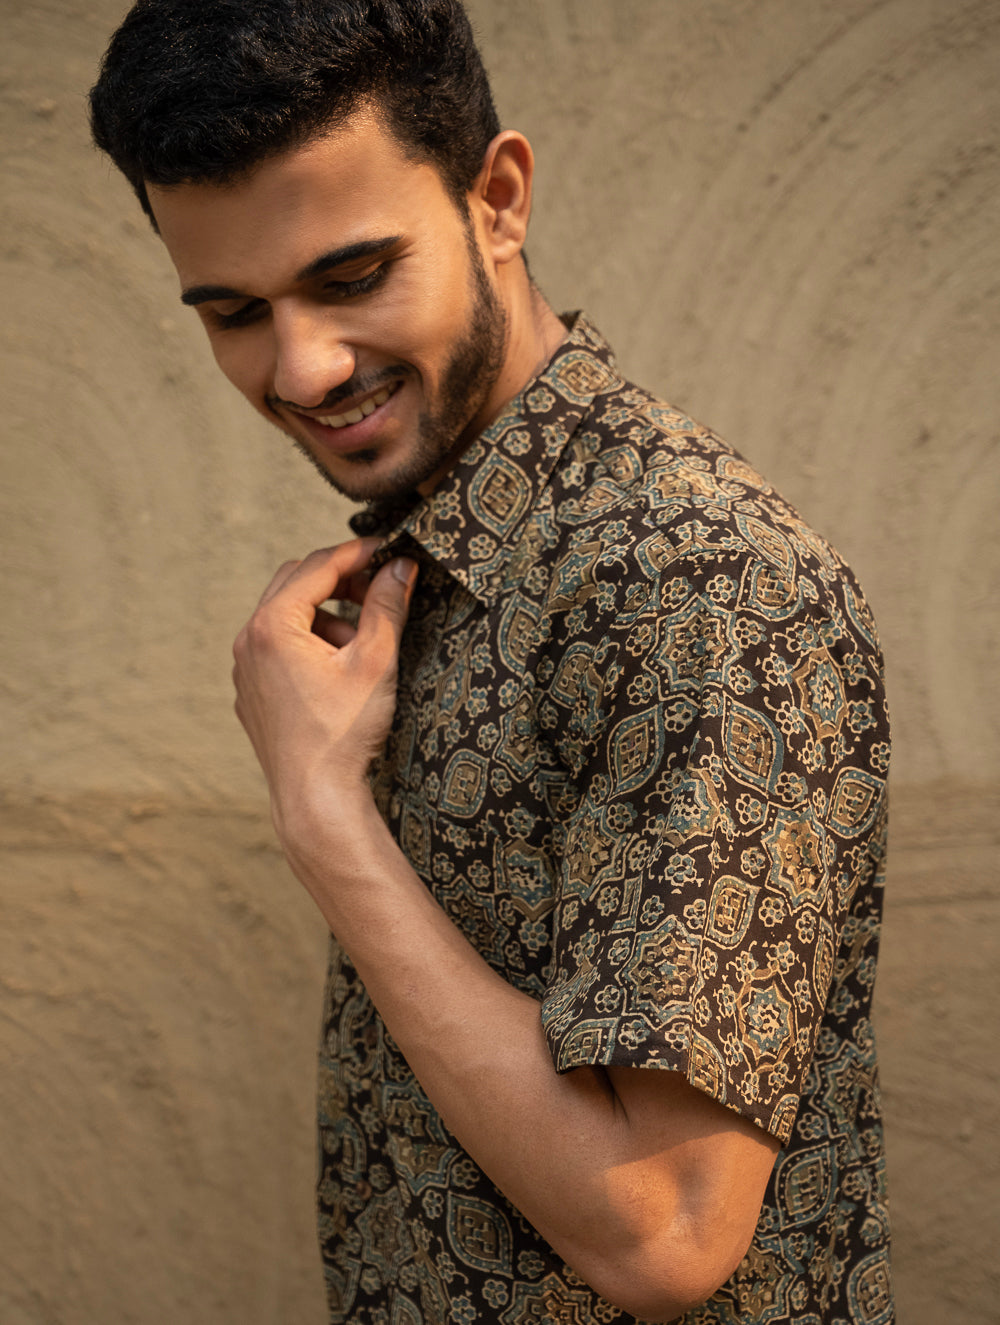 Load image into Gallery viewer, Ajrakh Hand Block Printed Cotton Shirt - Black Flora